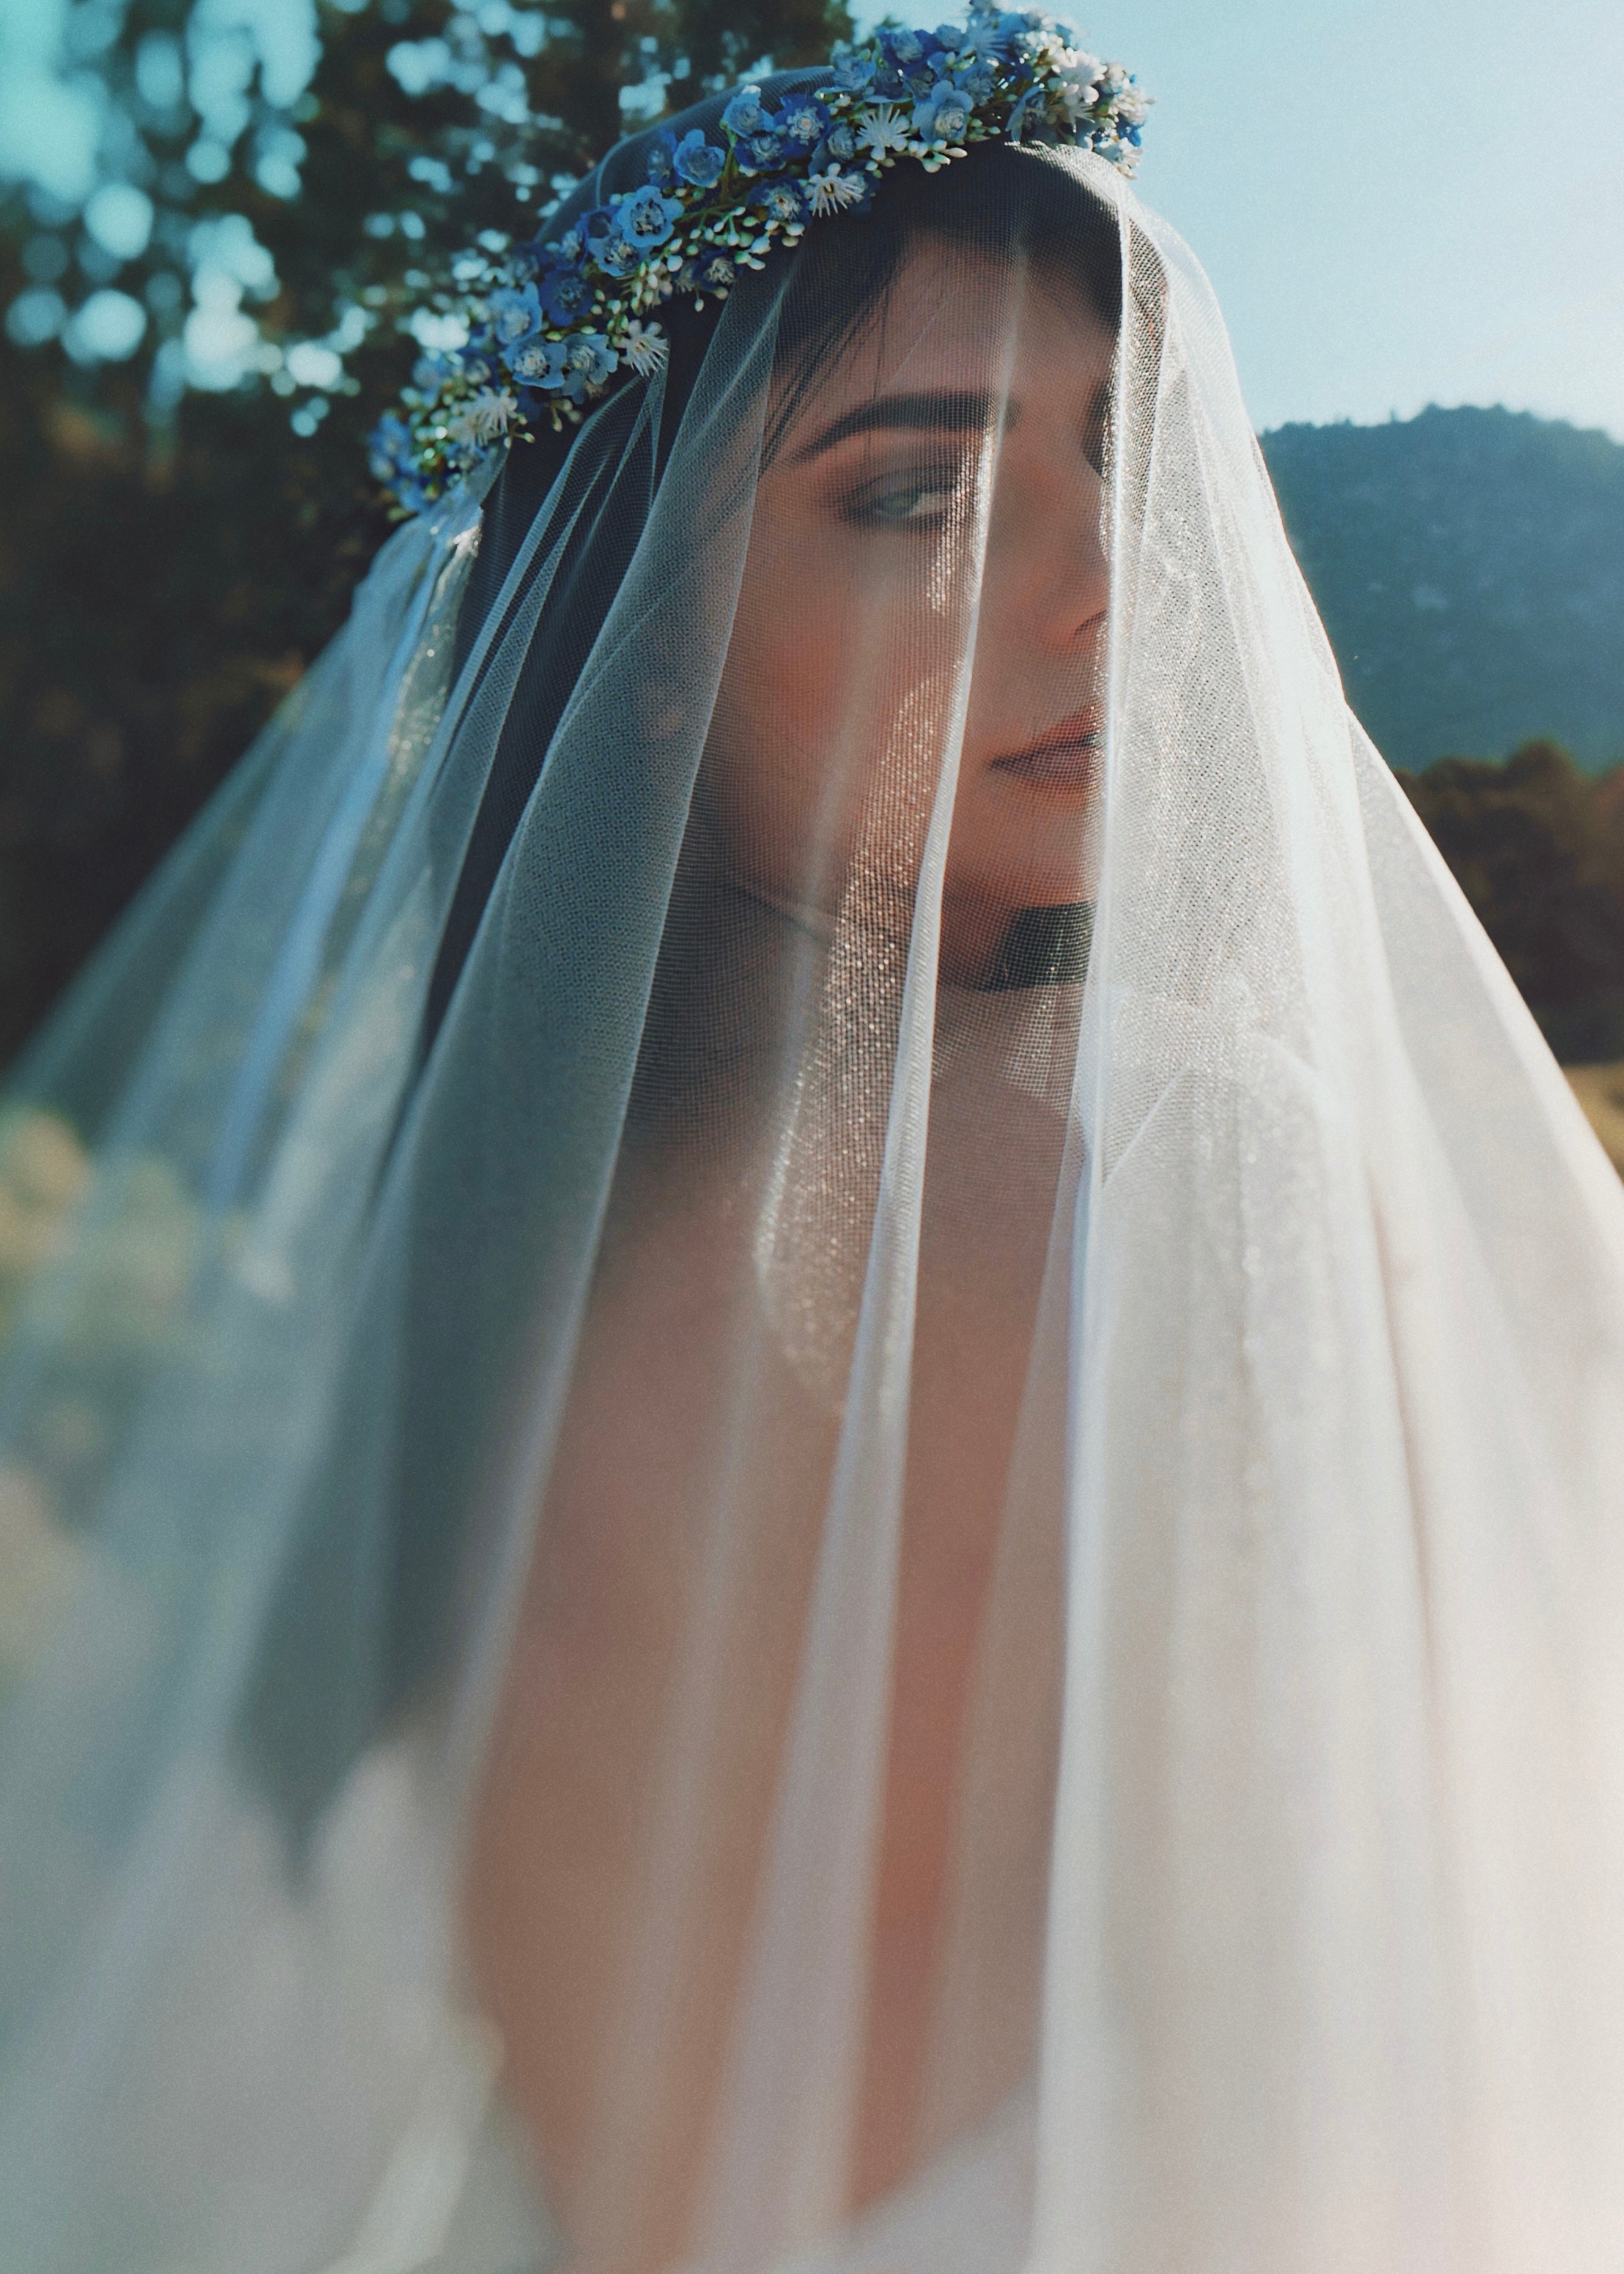 Lauren Elaine | Bridal & Brand | Los Angeles, California Lauren Elaine: Ombre Rainbow Colorful Butterfly Wedding Veil Blusher Style / Natural White (Pictured) / Royal (200 x 108)